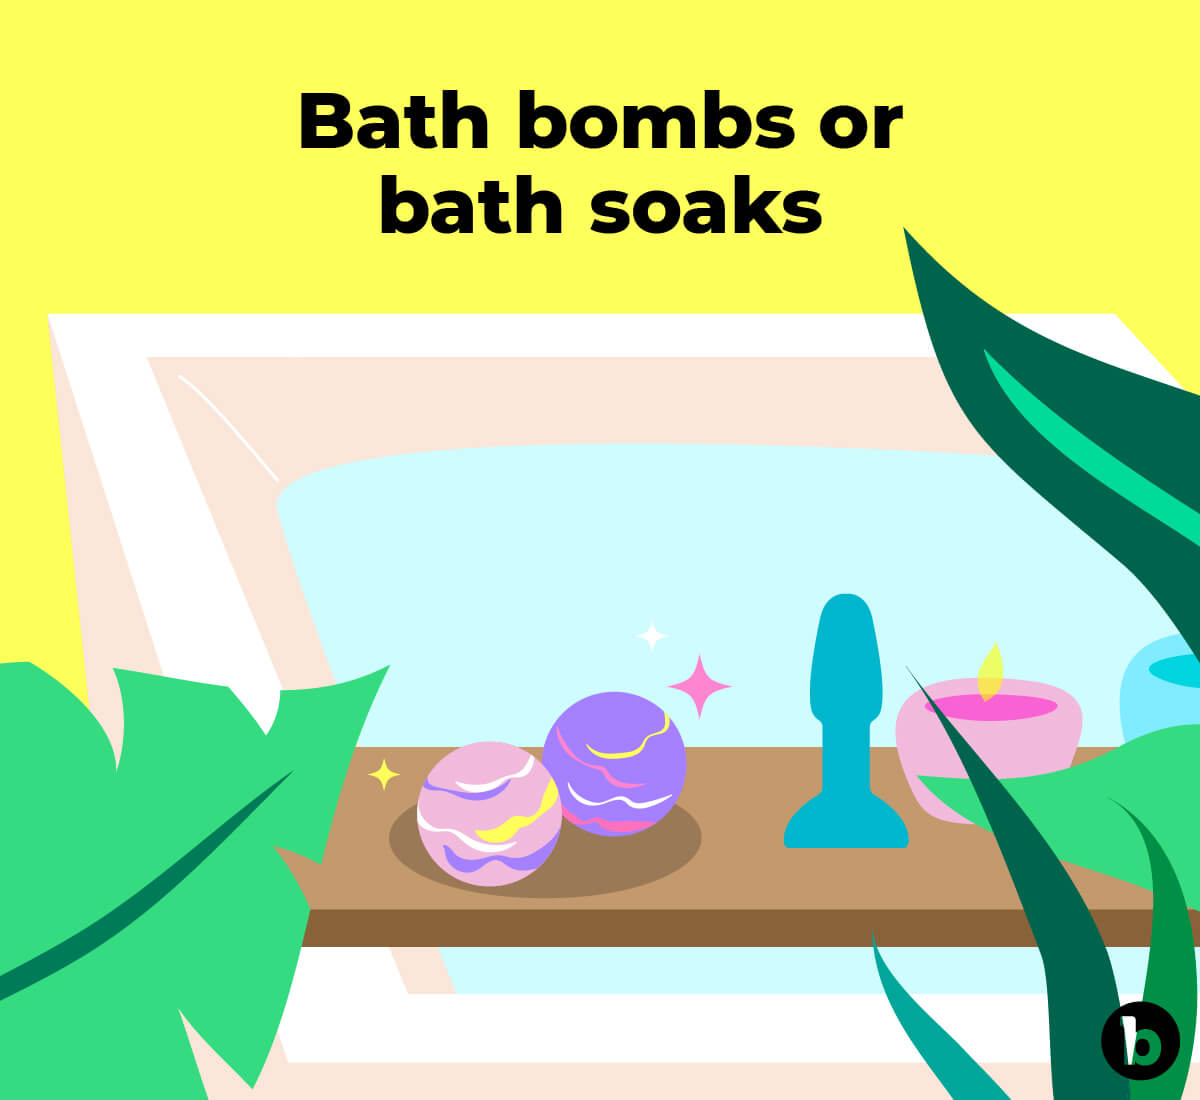 Using a bath bomb or bath soak infused with CBD or THC is another alternative way to relax before anal play